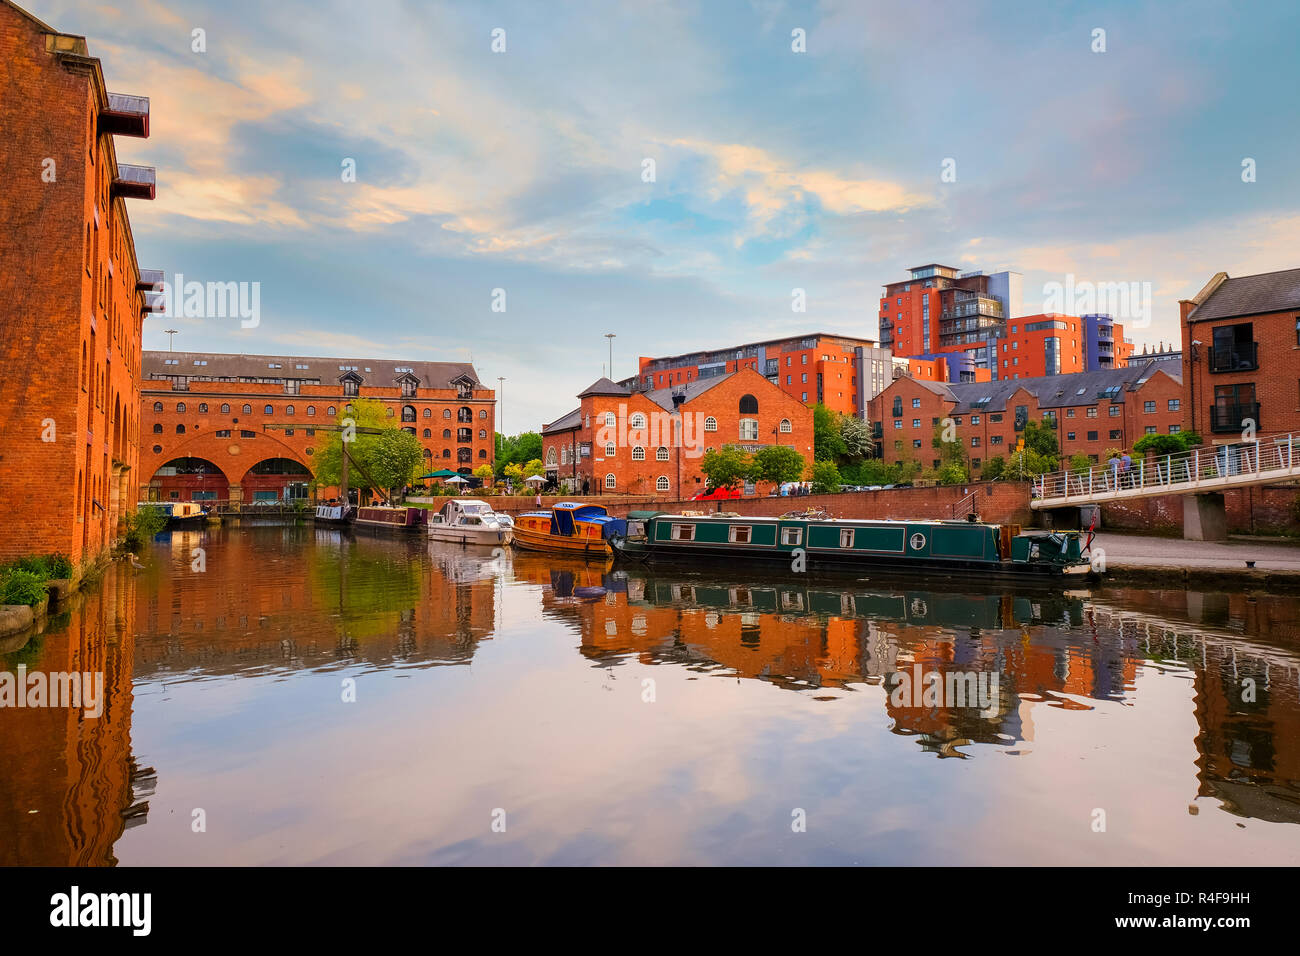 Castlefield, the inner city conservation area which  bounded by the River Irwell, Quay St., Deansgate and the Chester Rd. in Manchester, UK Manchester Stock Photo